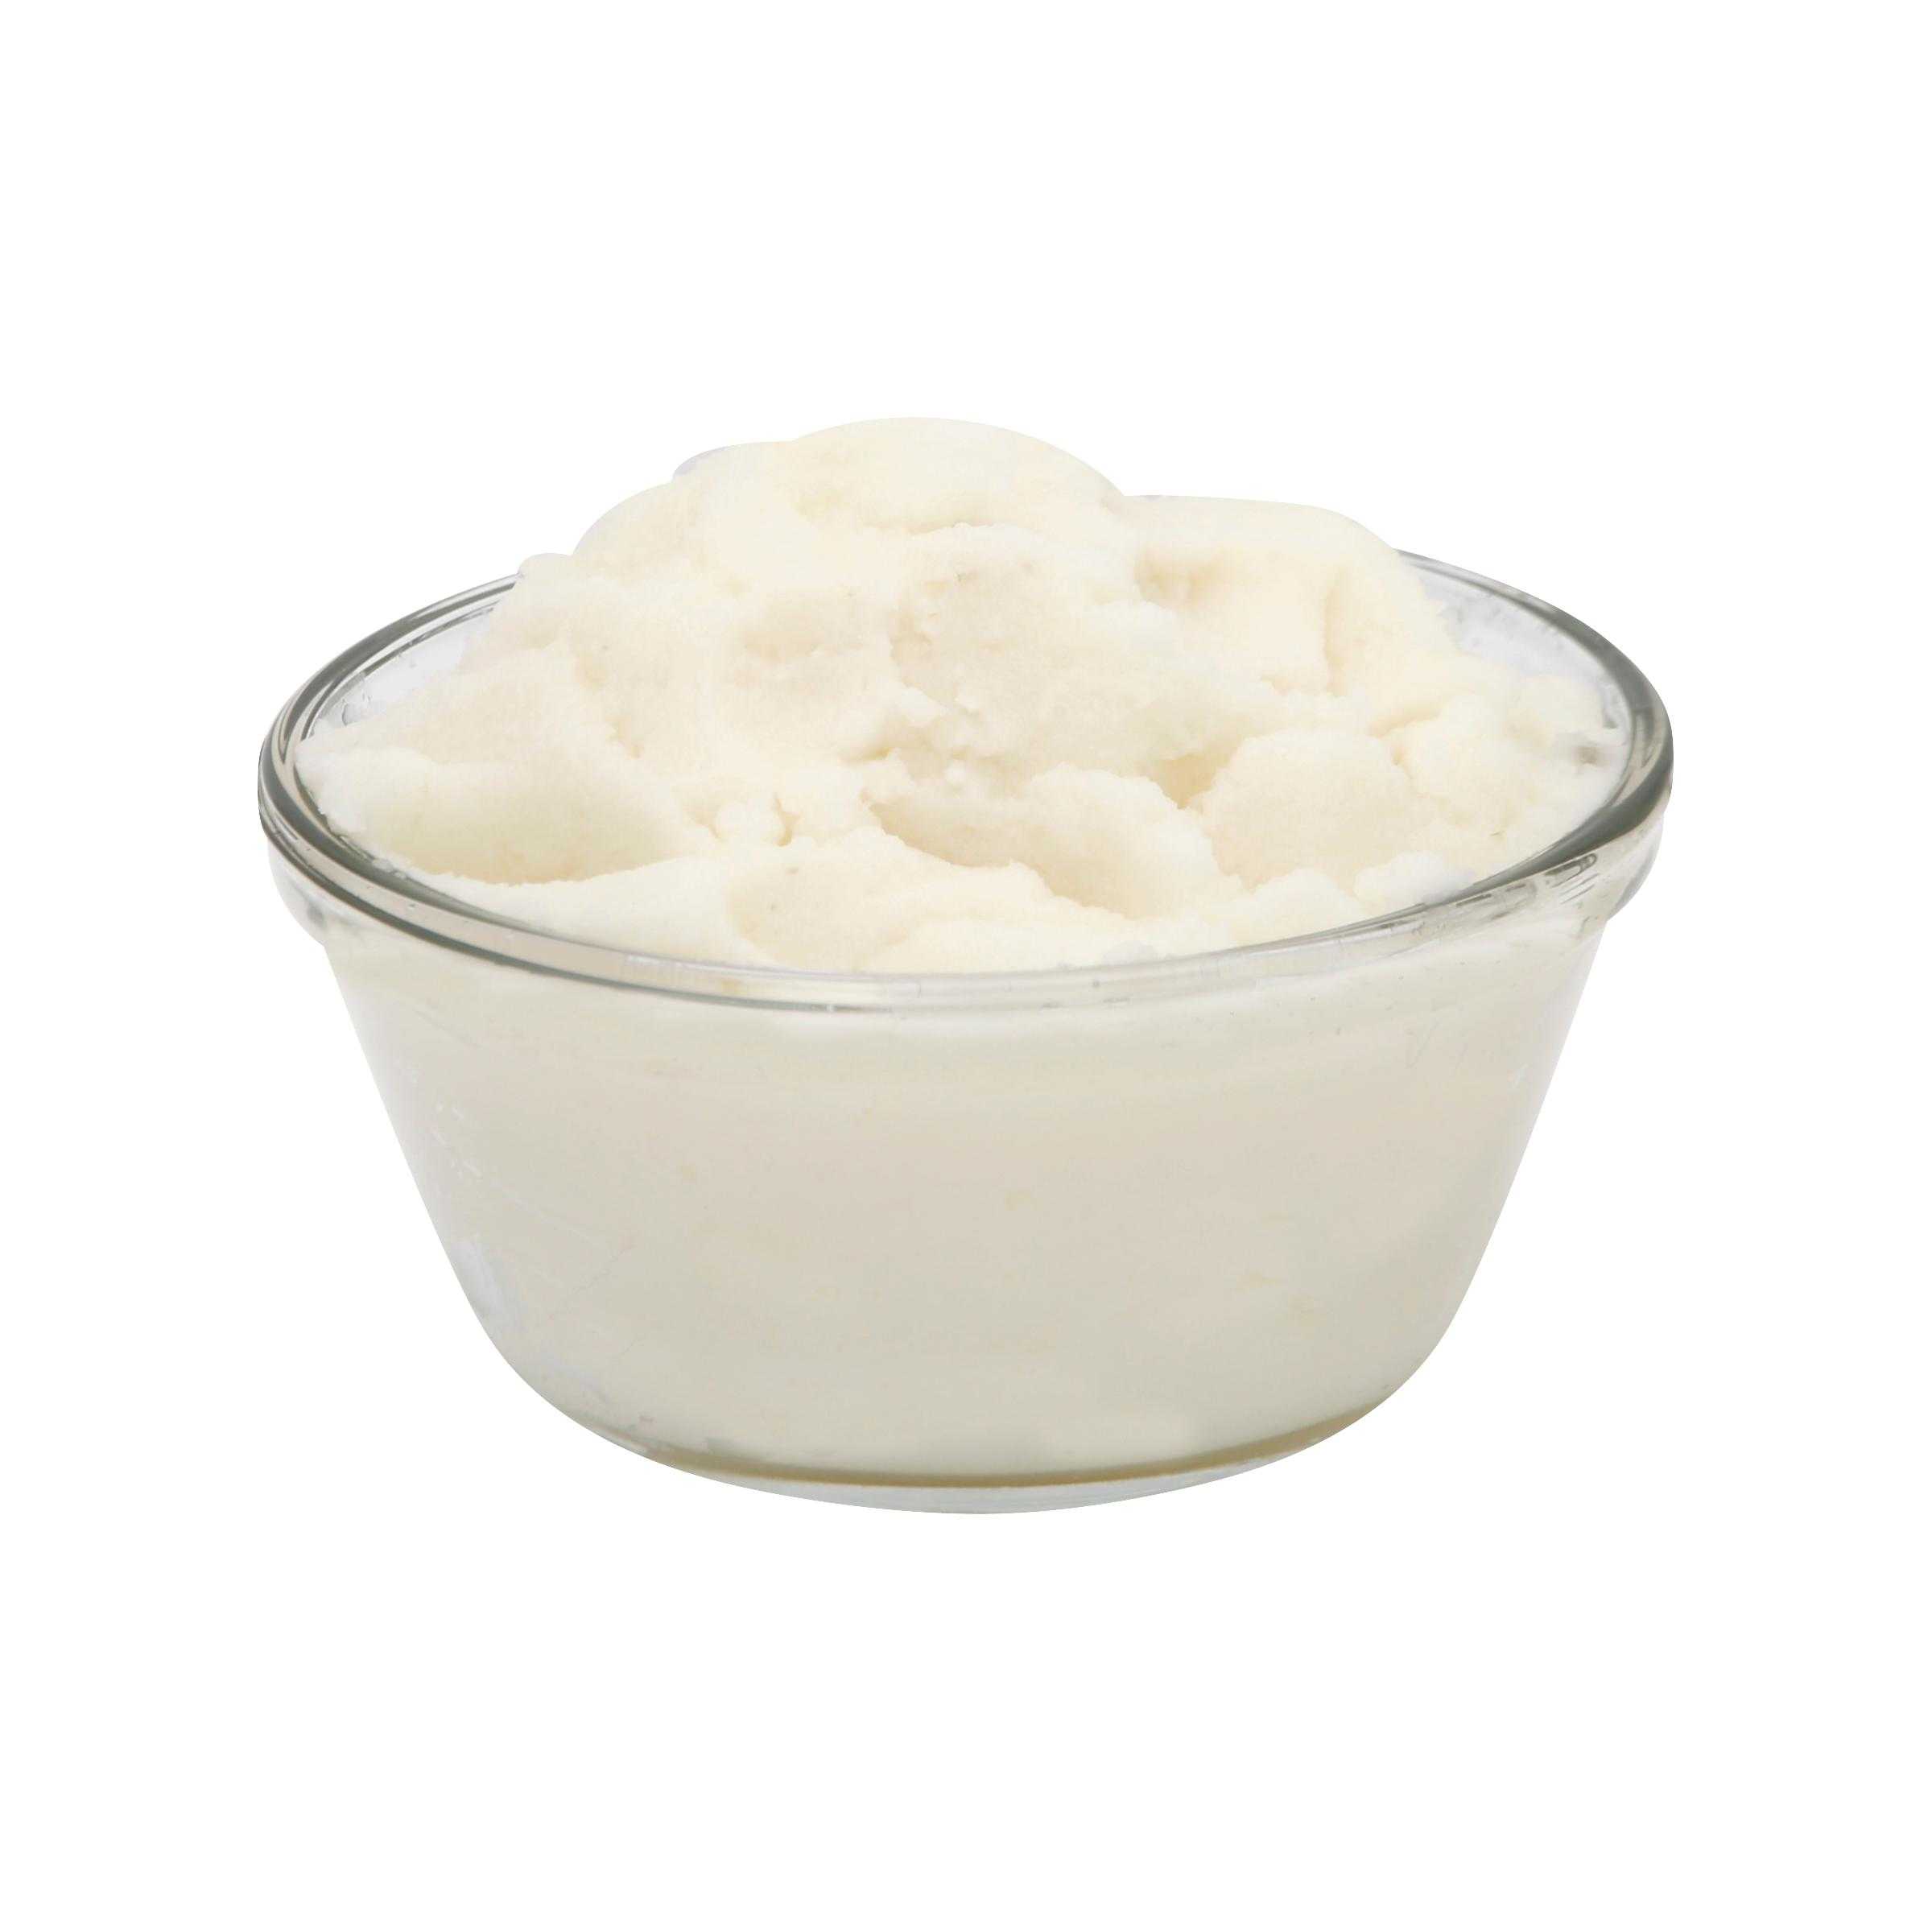 Simply Potatoes, Refrigerated Traditional Mashed Potatoes, peeled Russet potatoes, 6/6 Lb Bags